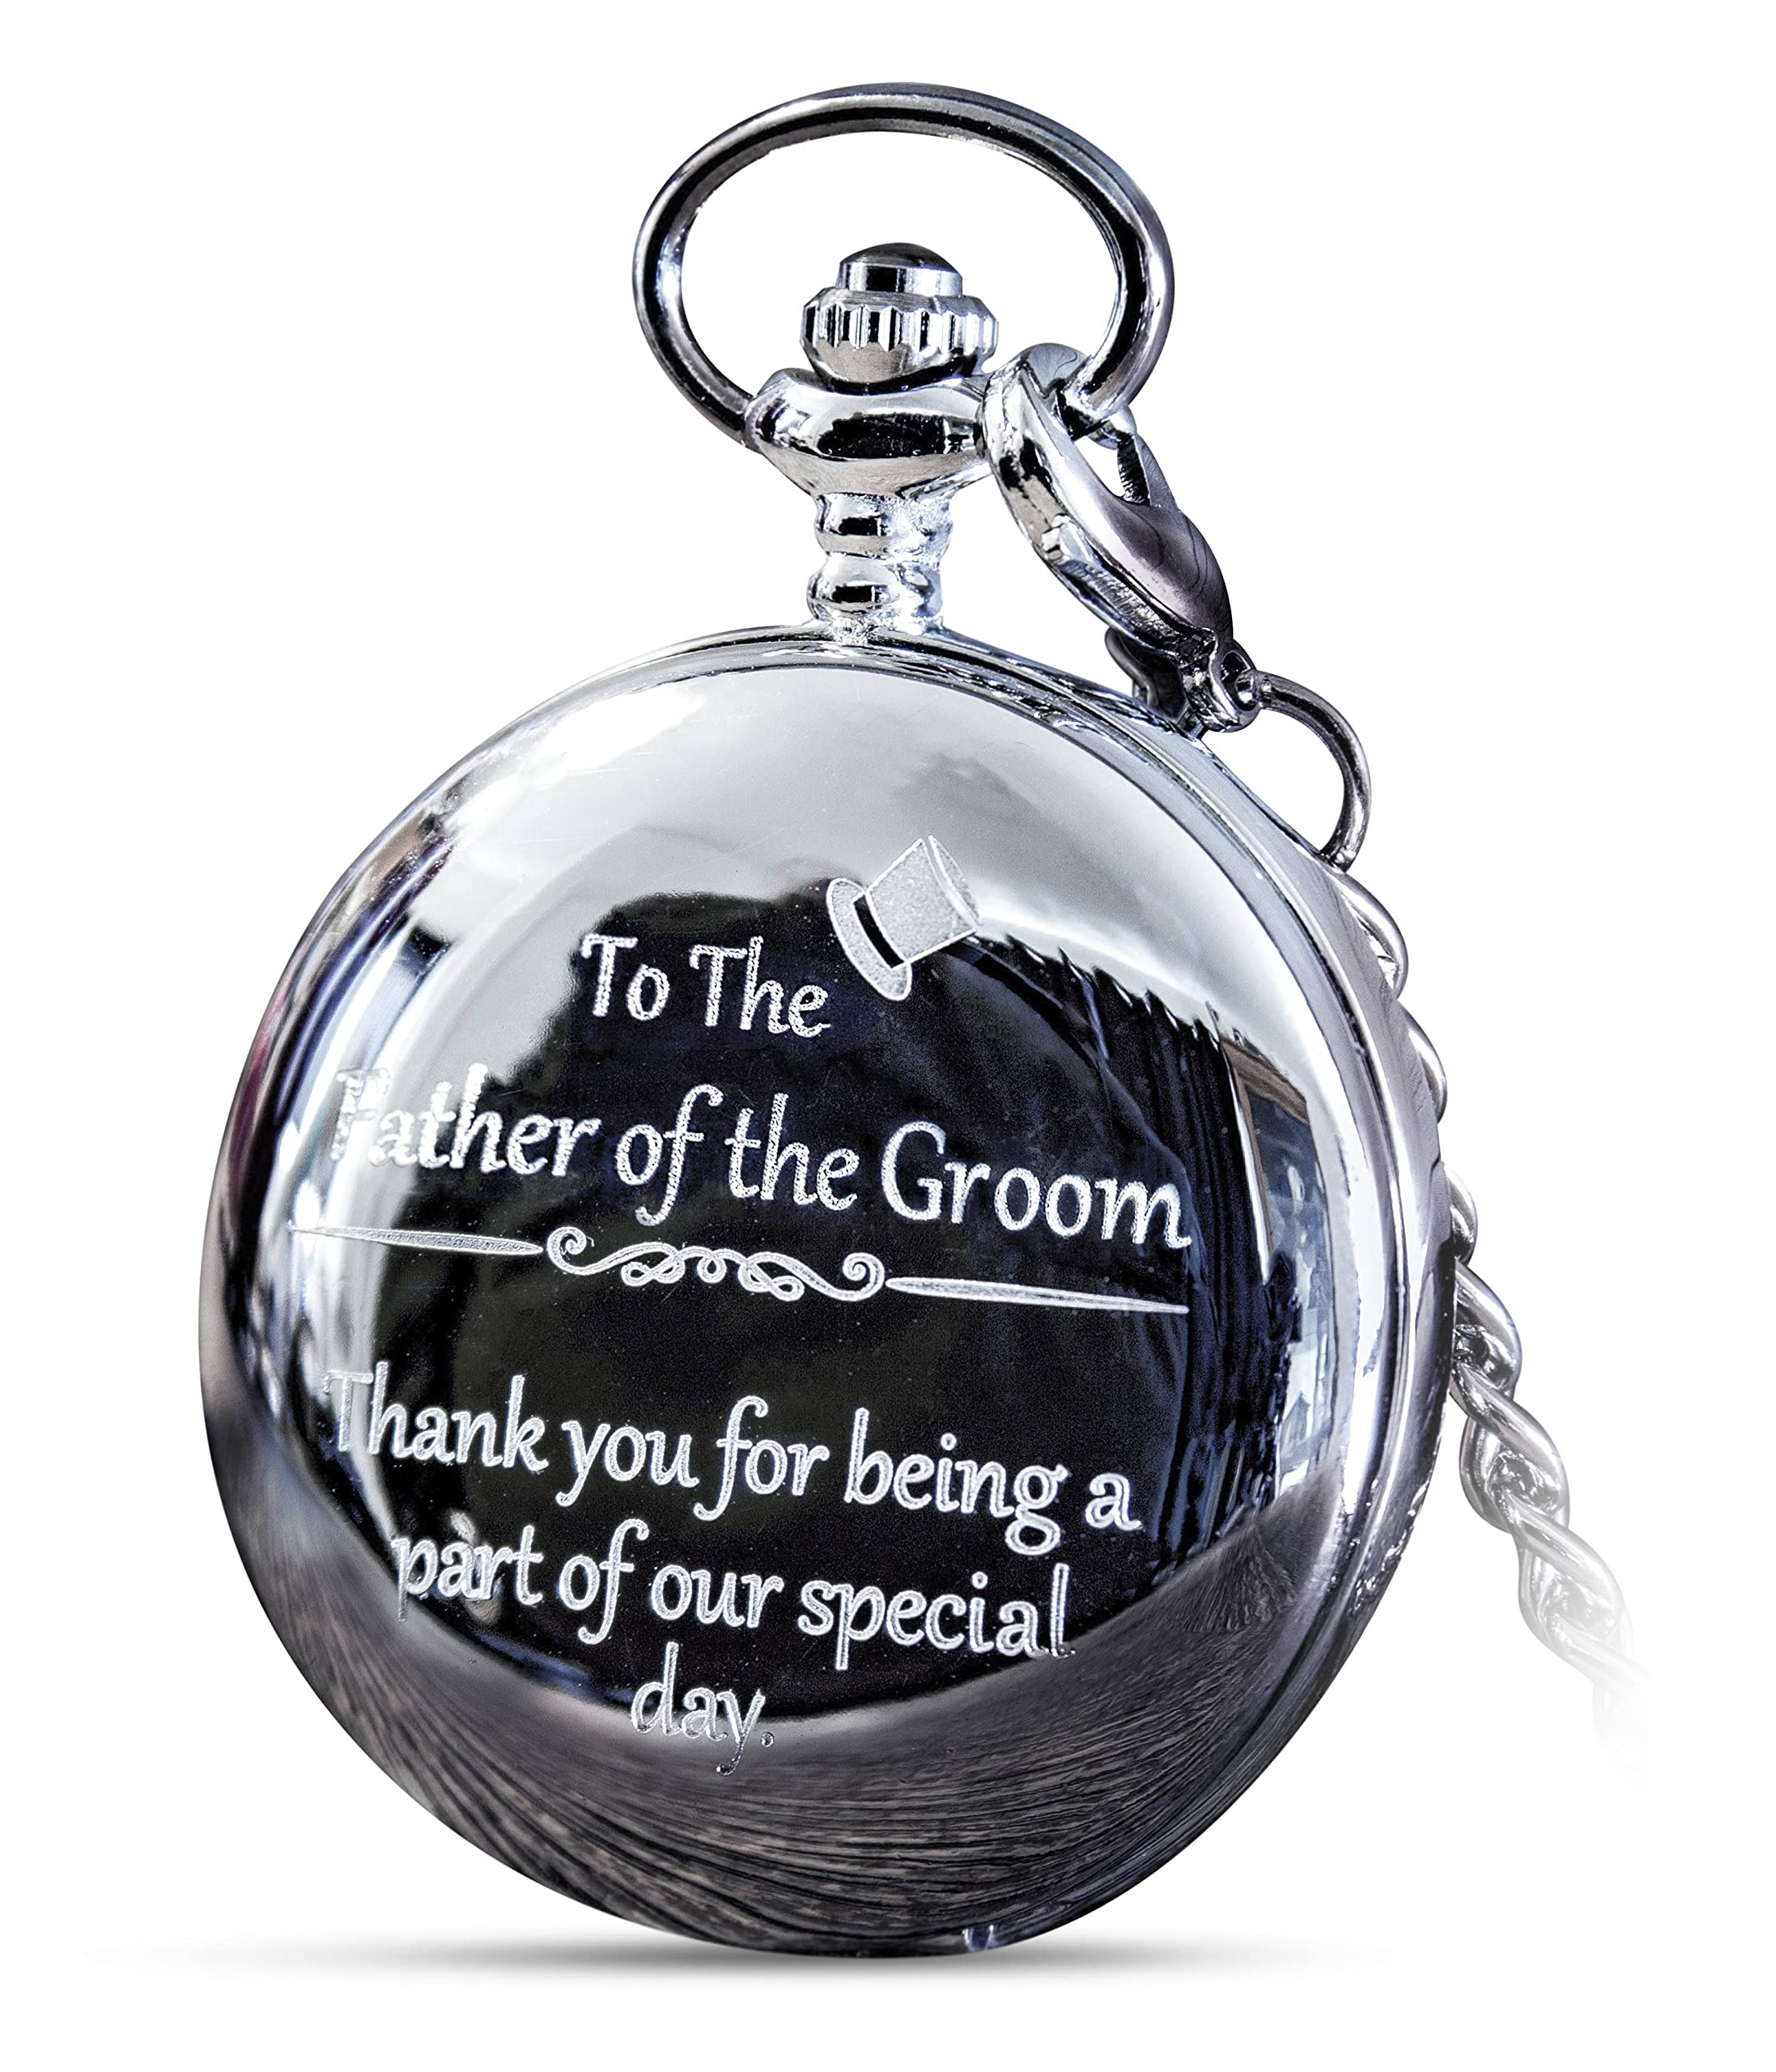 FJ FREDERICK JAMES Father of The Groom Gifts - Engraved 'Father of The Groom' Pocket Watch - Wedding Gifts for Father of The Groom from Groom & Bride